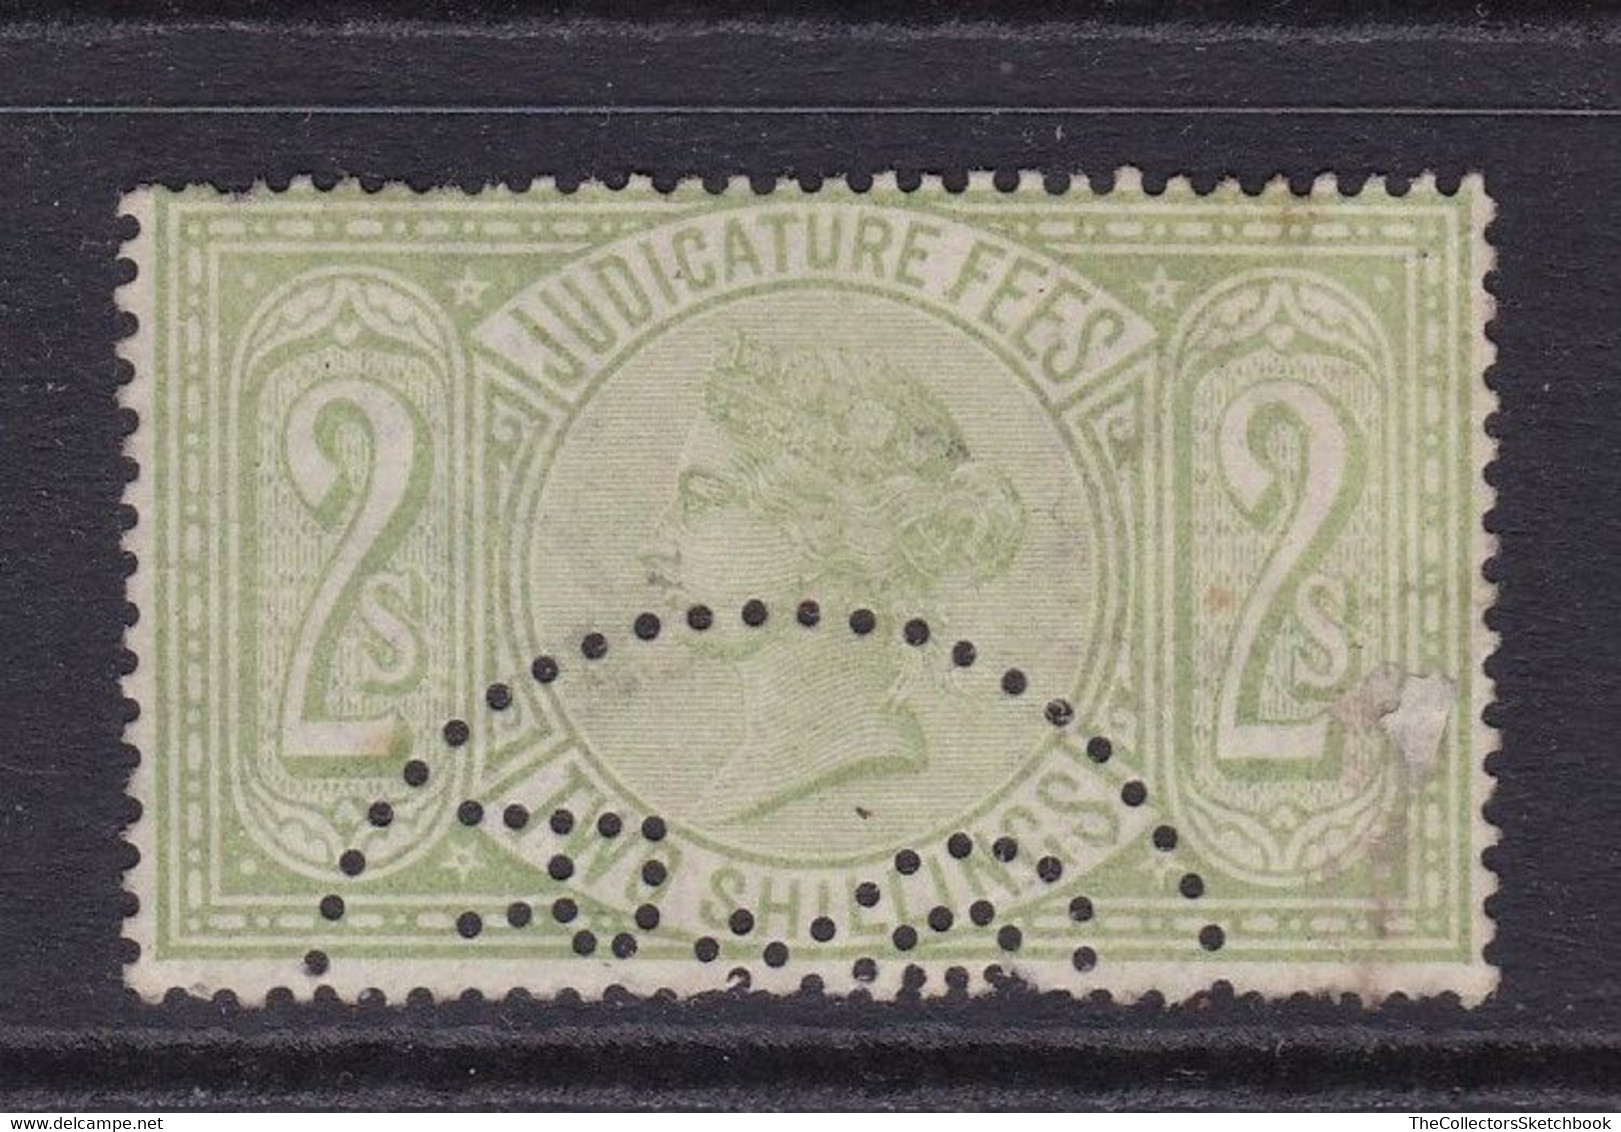 GB Fiscal/ Revenue Stamp.  Judicature Fees 2/- Green Fine Used. Barefoot 35 - Fiscale Zegels